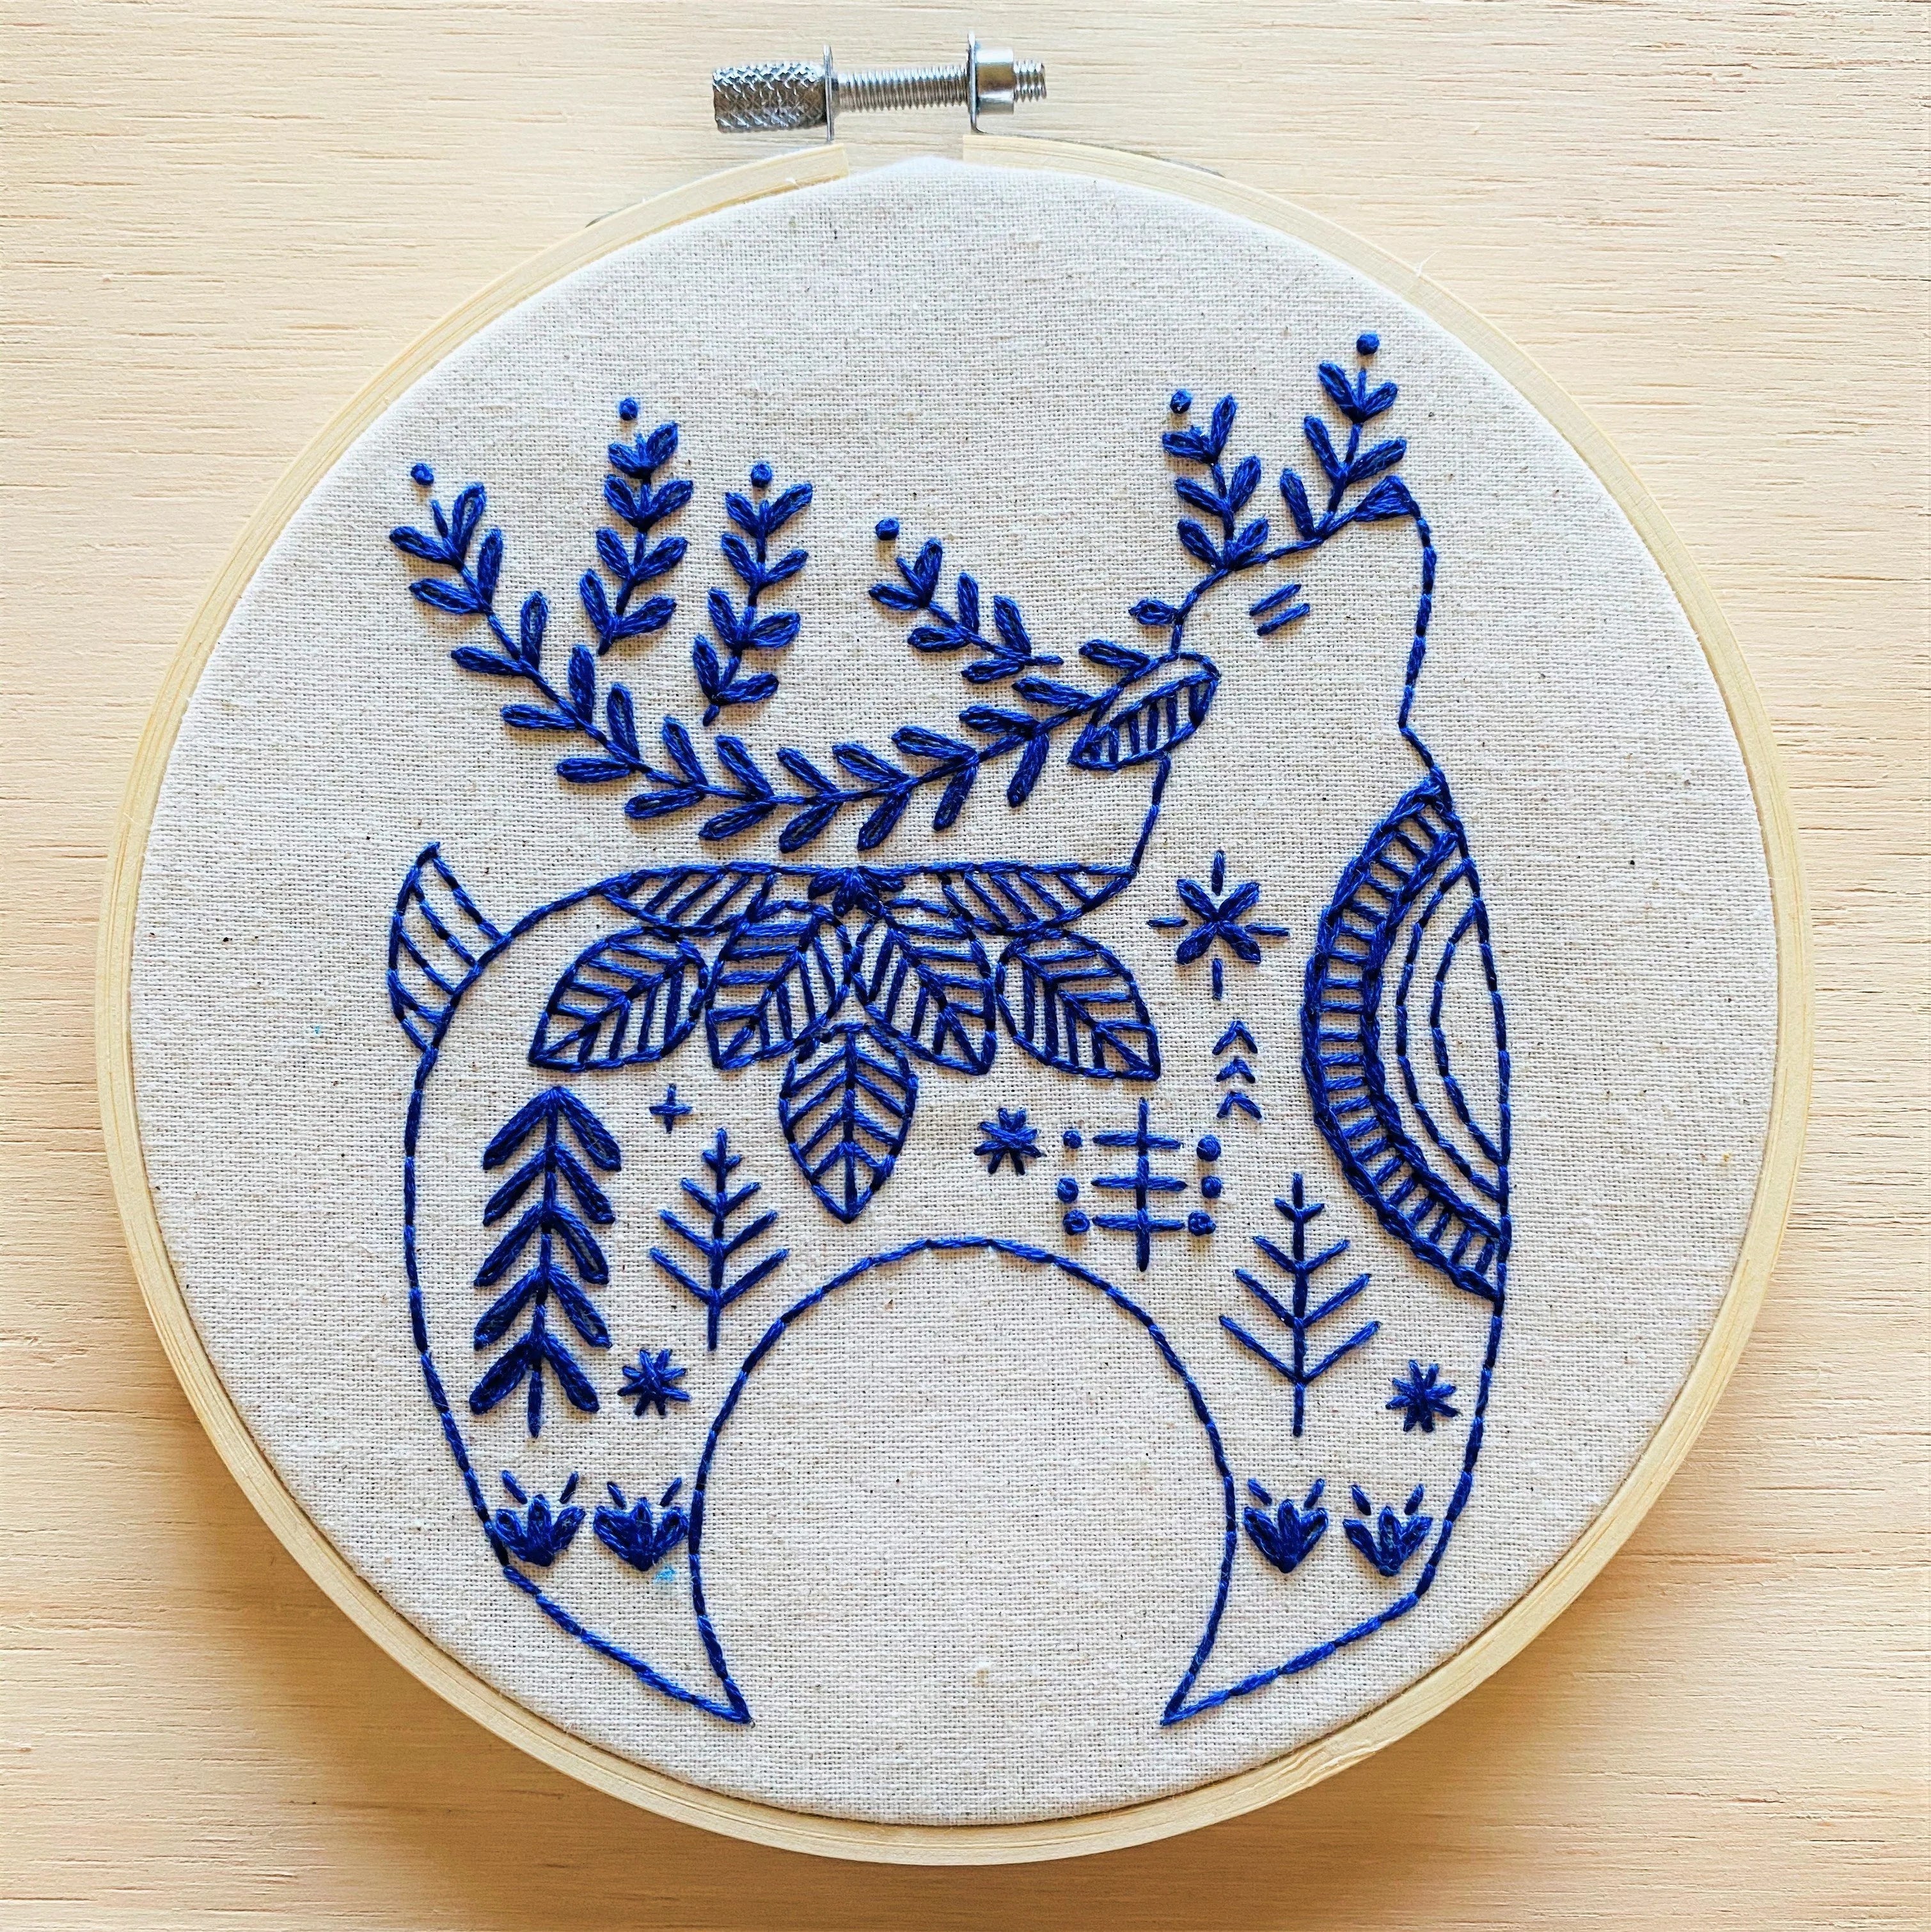 Hygge Reindeer - Full Embroidery Kit